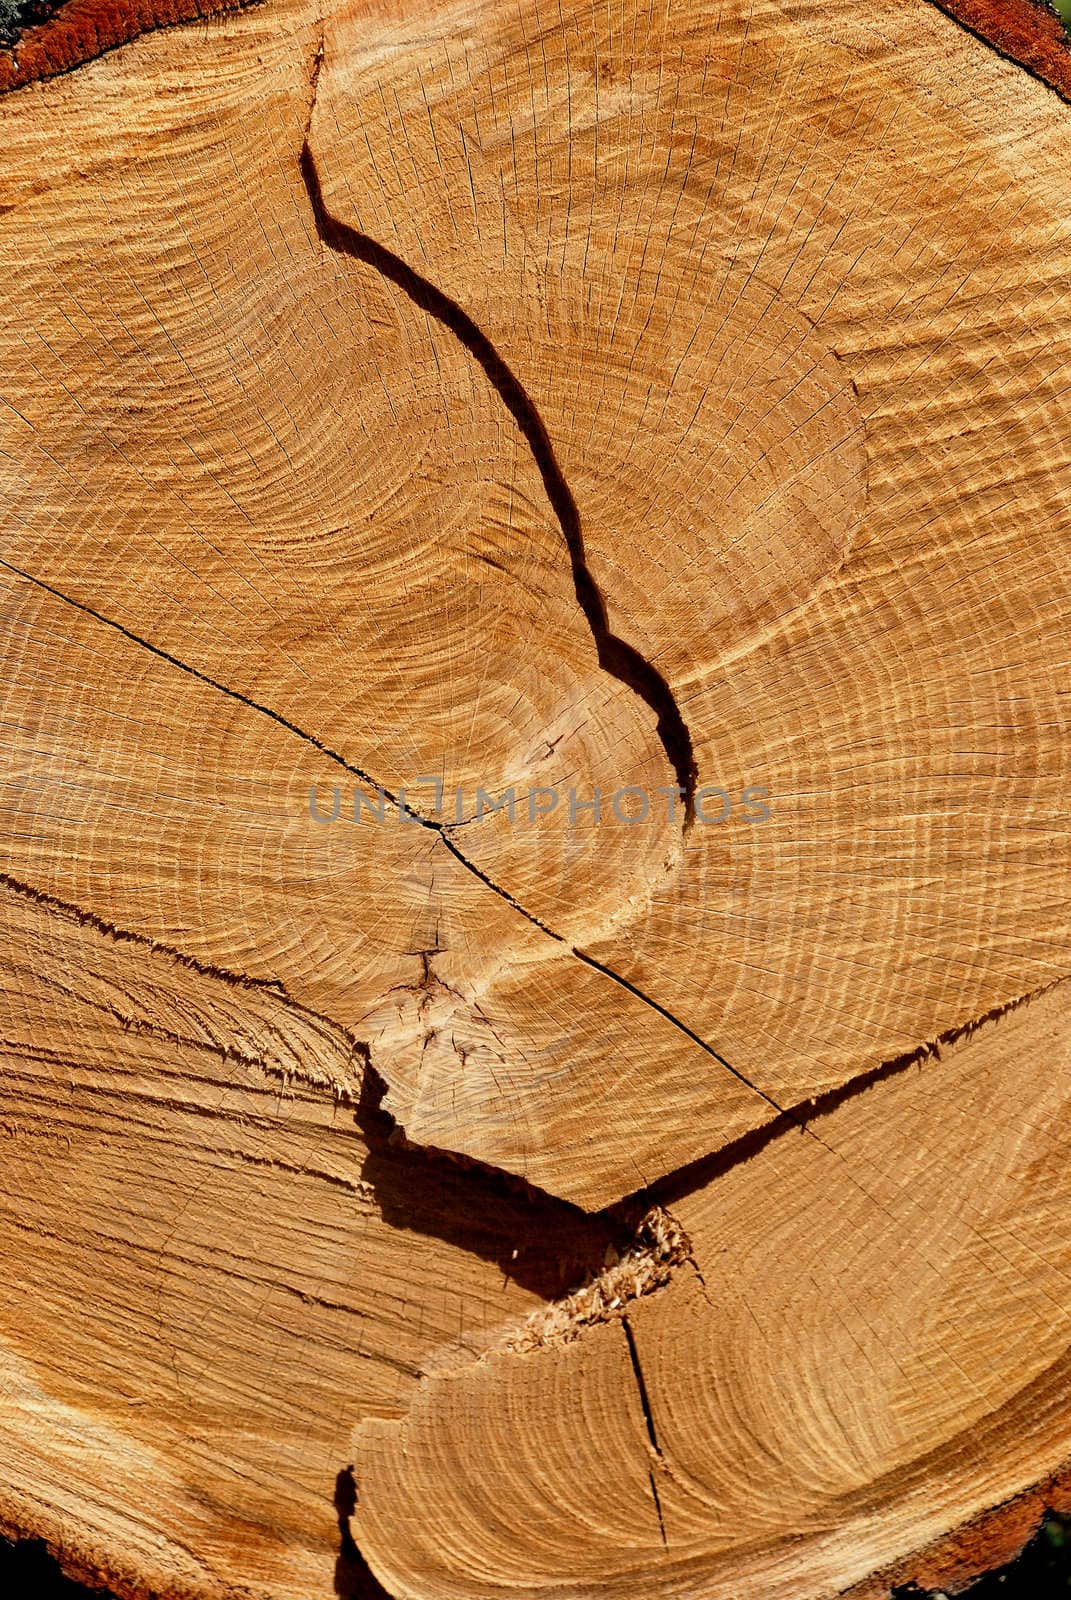 Texture of cut oak can reveal his age